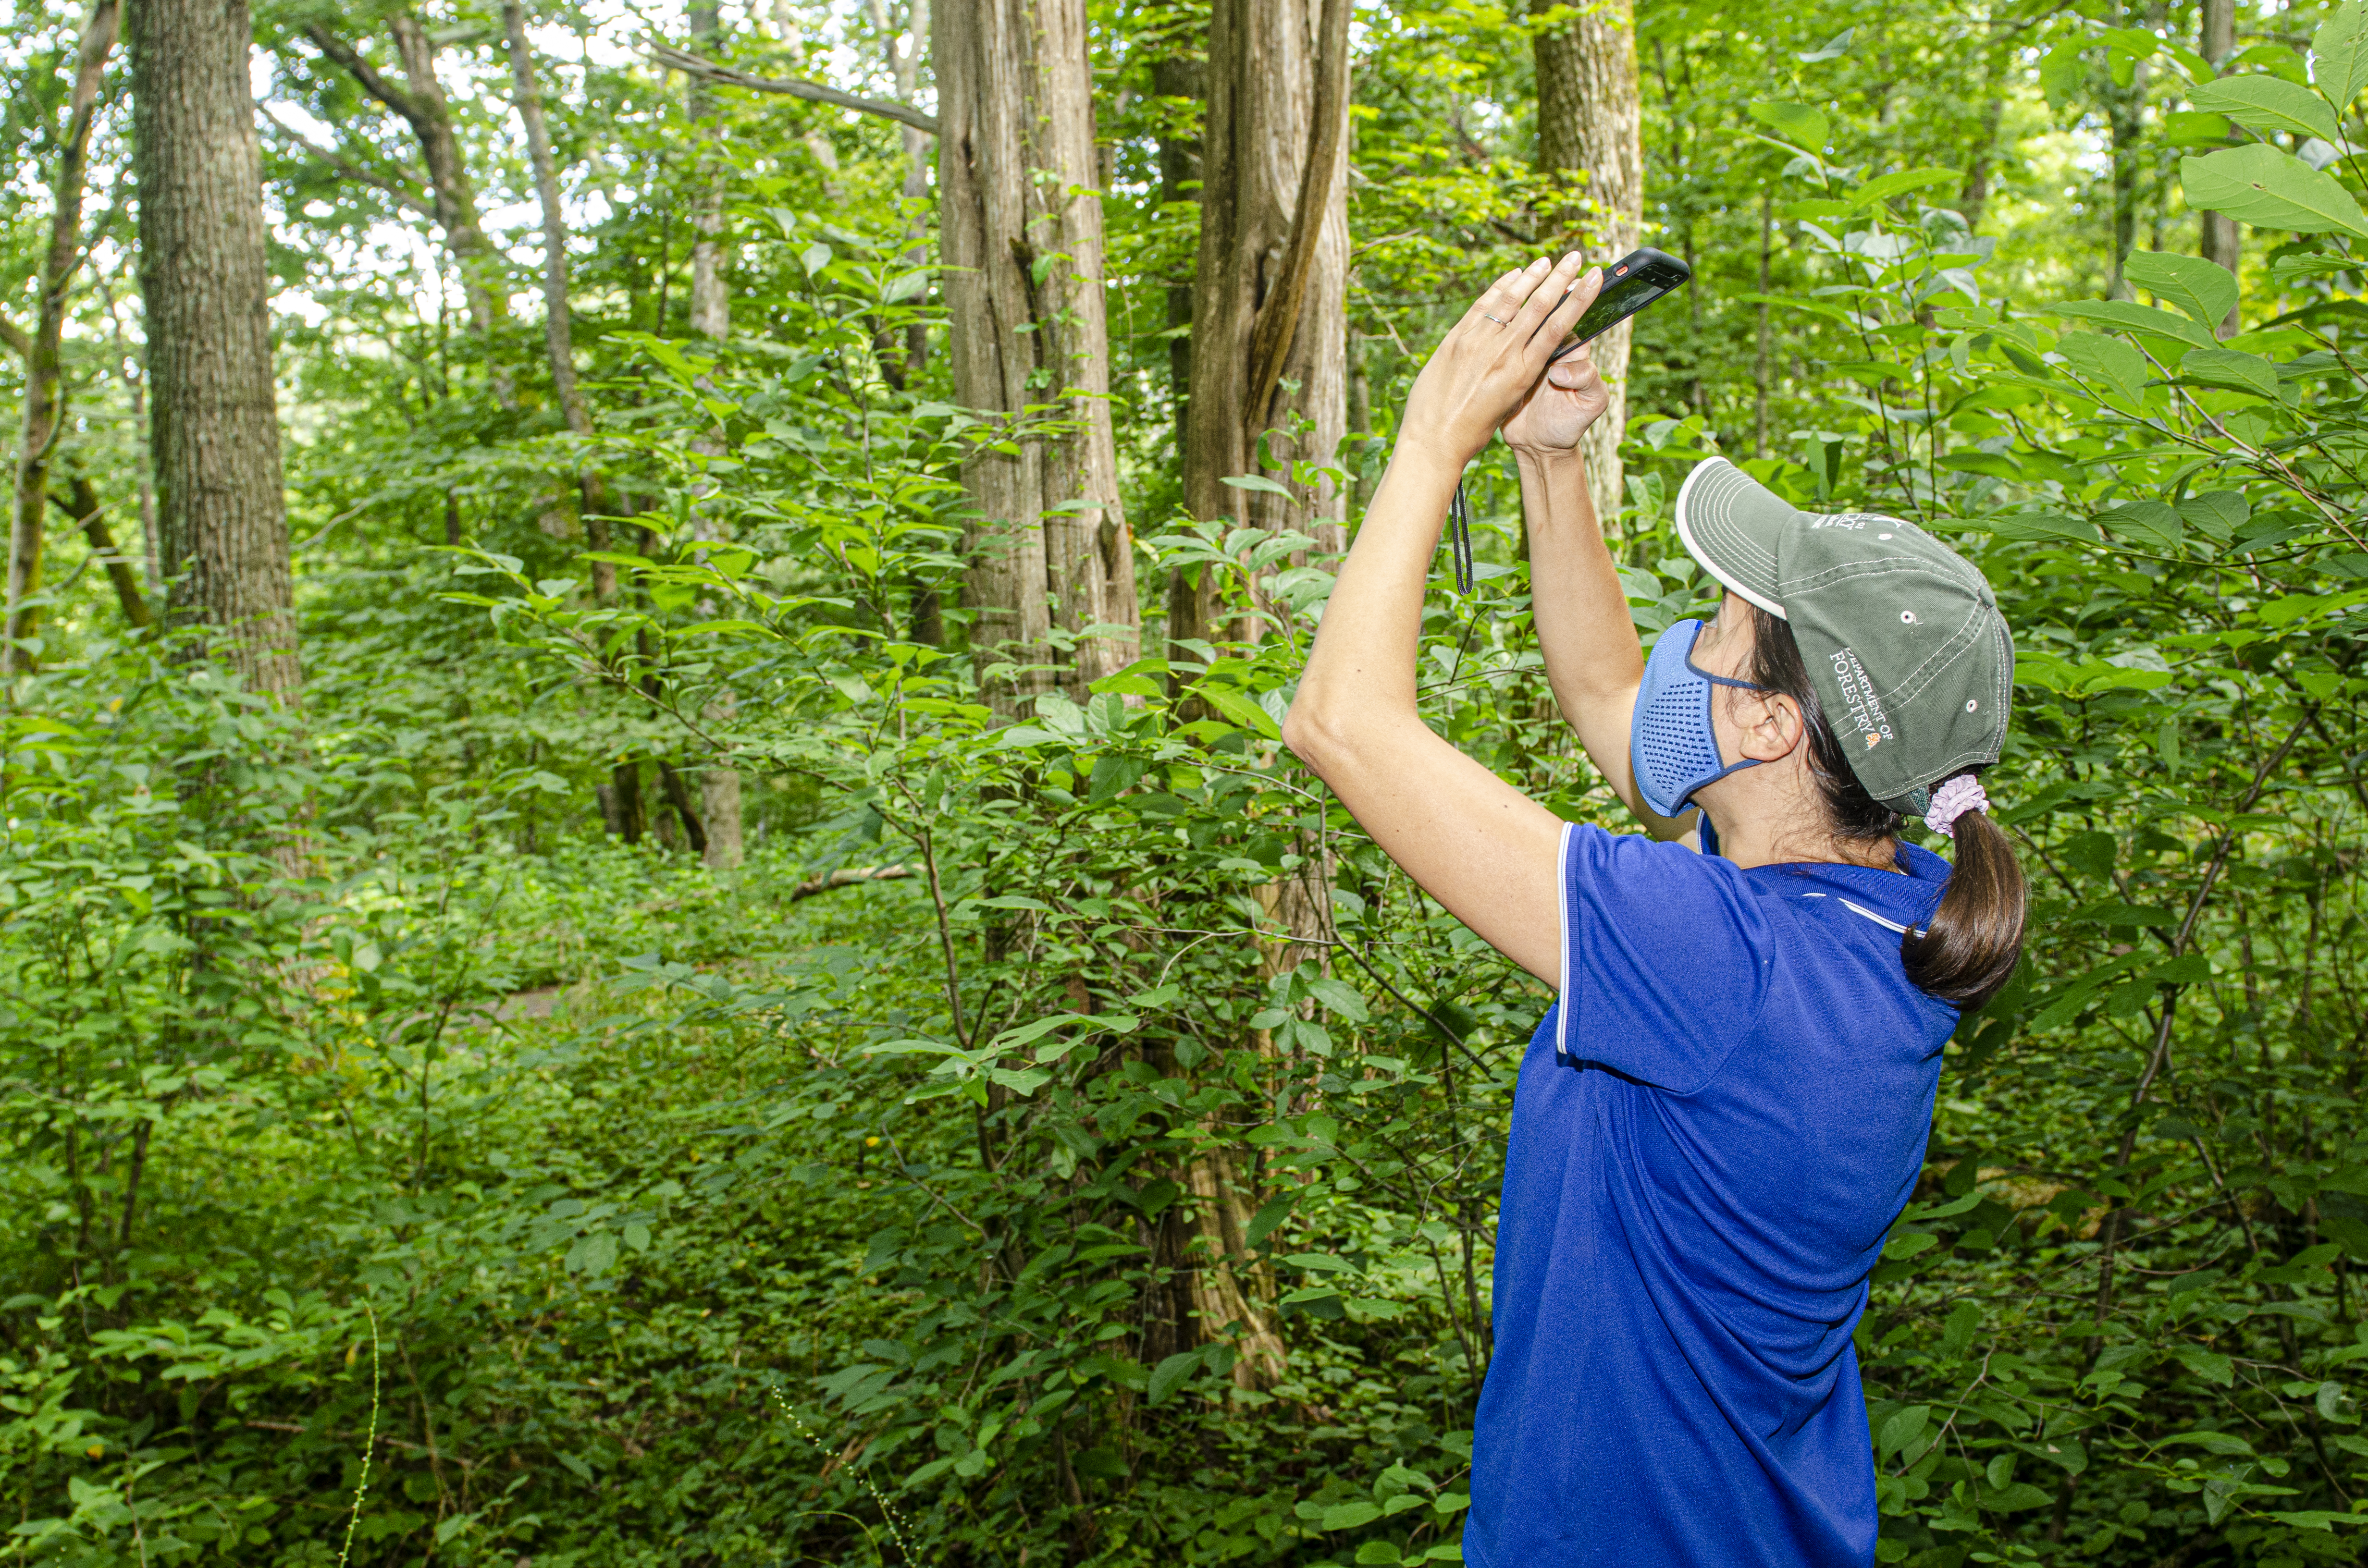 Ellen Crocker takes a picture of the tree canopy for the HealthyWoods app. Photo by Carol Lea Spence